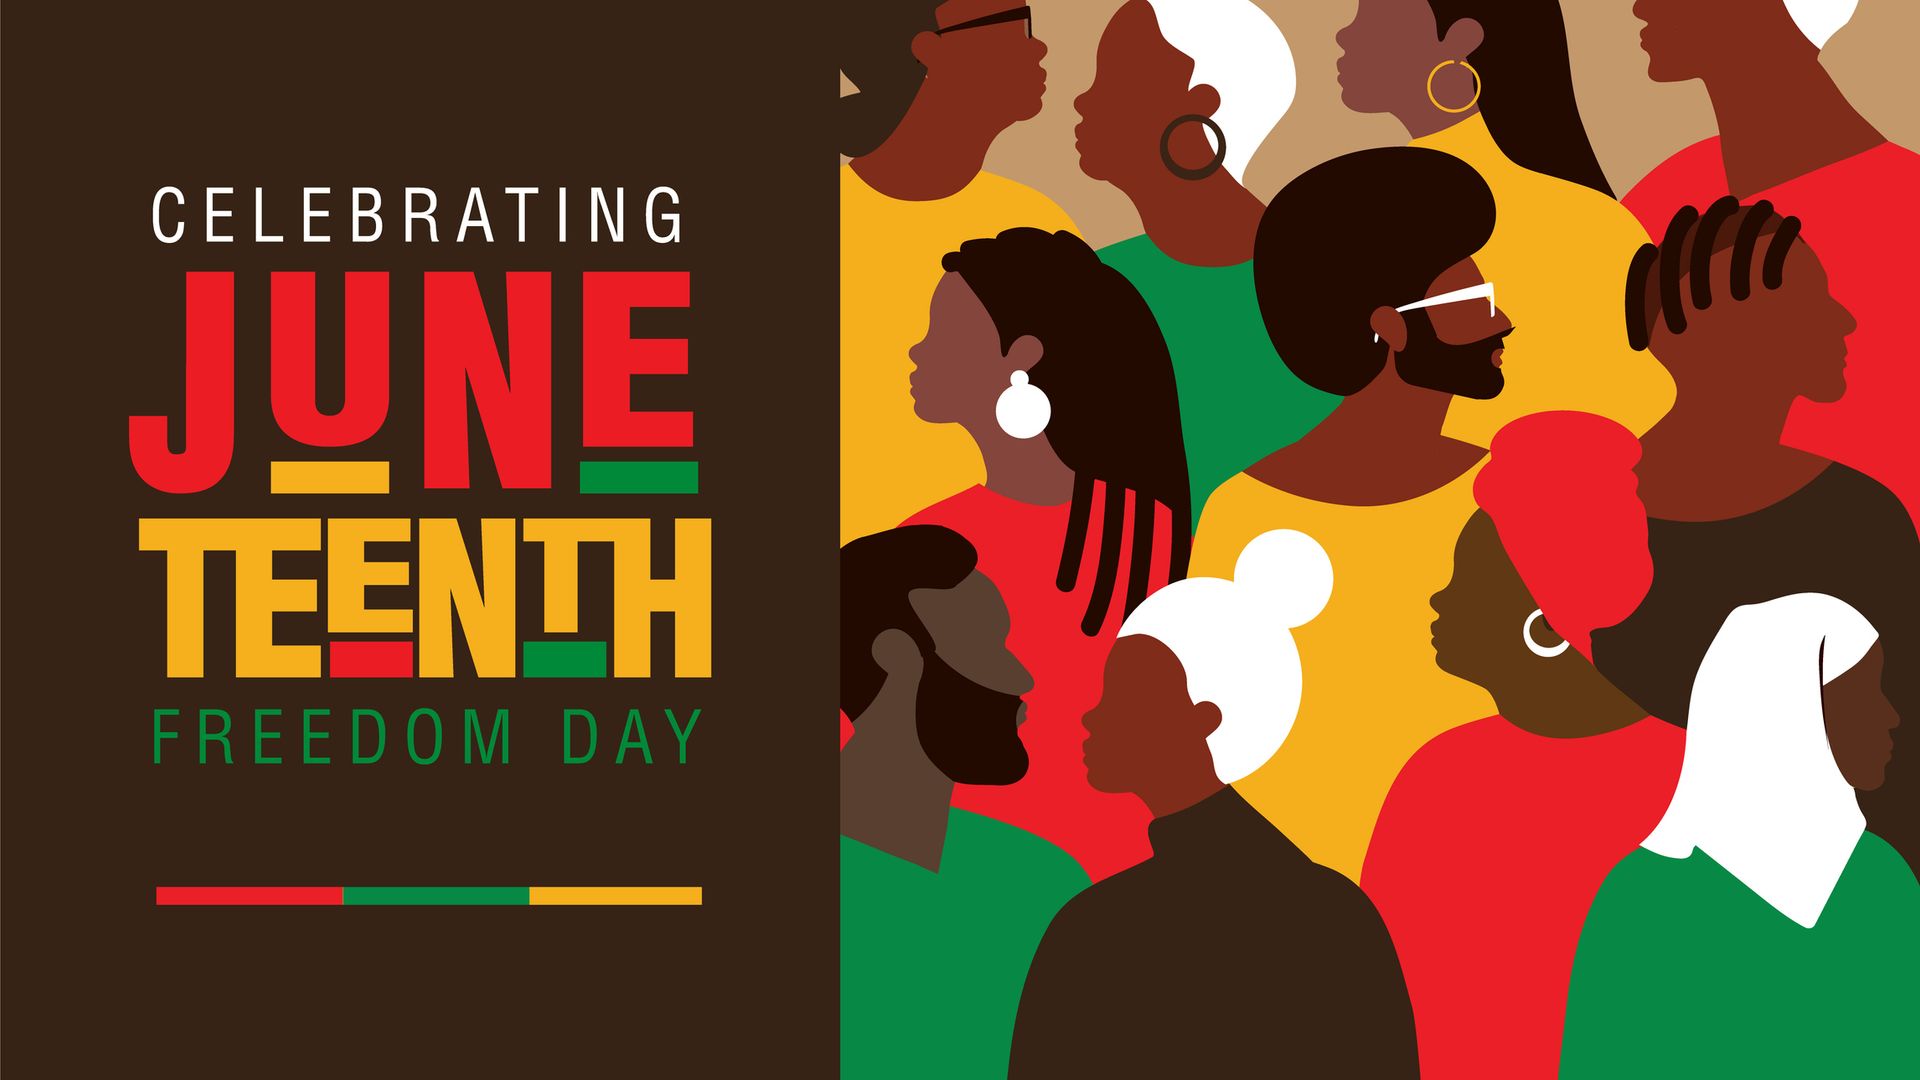 Vector illustration of Juneteenth Celebration typography design. Fully editable vector eps. Use for advertisements, posters, web banners, leaflets, cards, t-shirt designs and backgrounds. African-American black history. Freedom or Liberation day. Royalty free stock image.